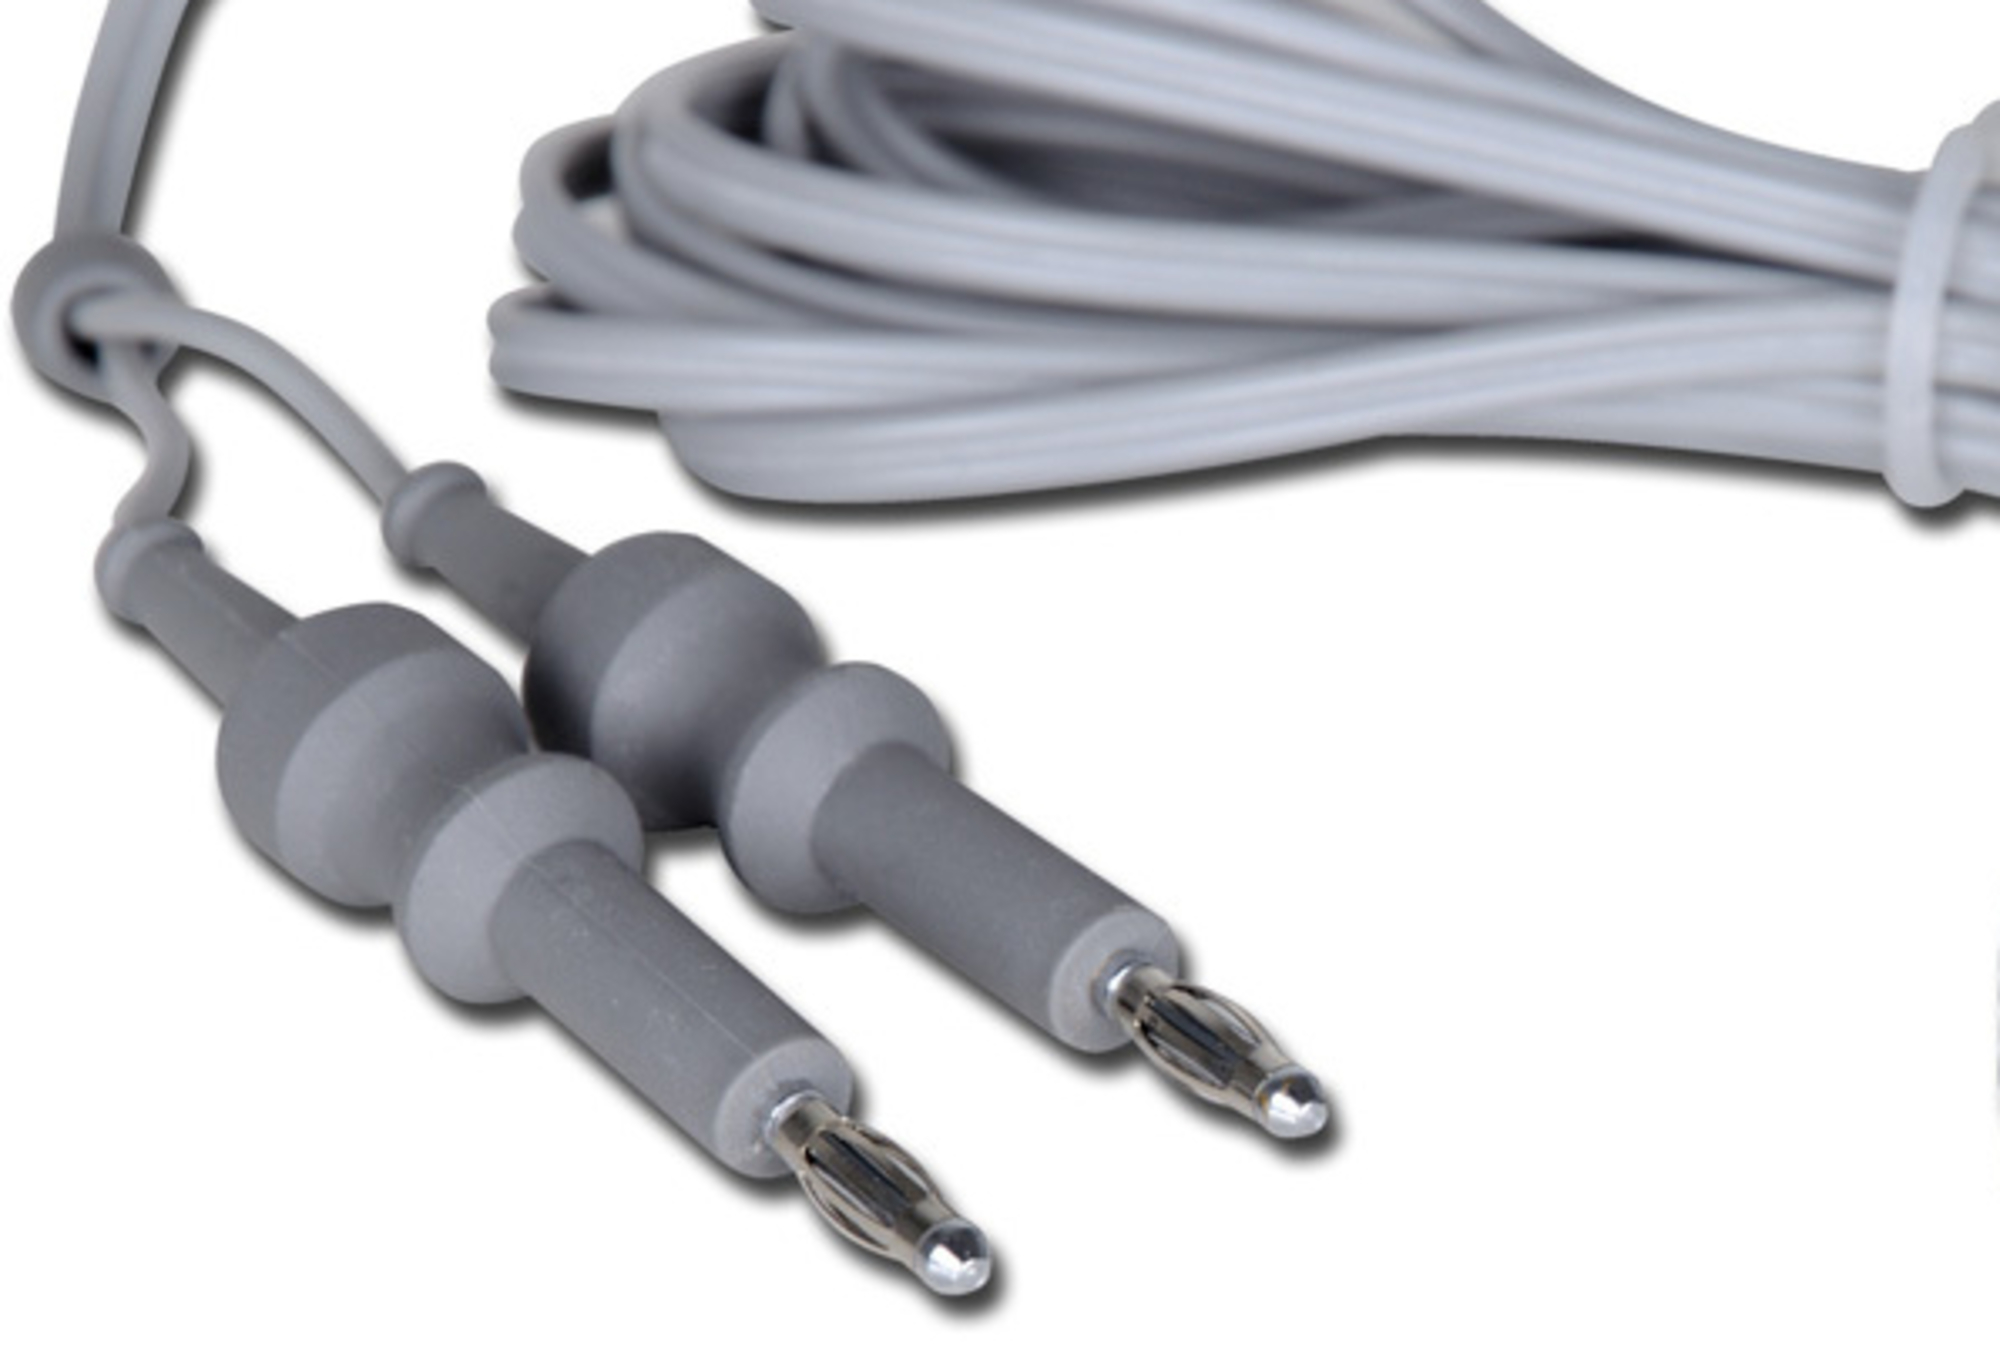 Surtron Diathermy Cable for Bipolar Forcep Two Pin Connection image 1